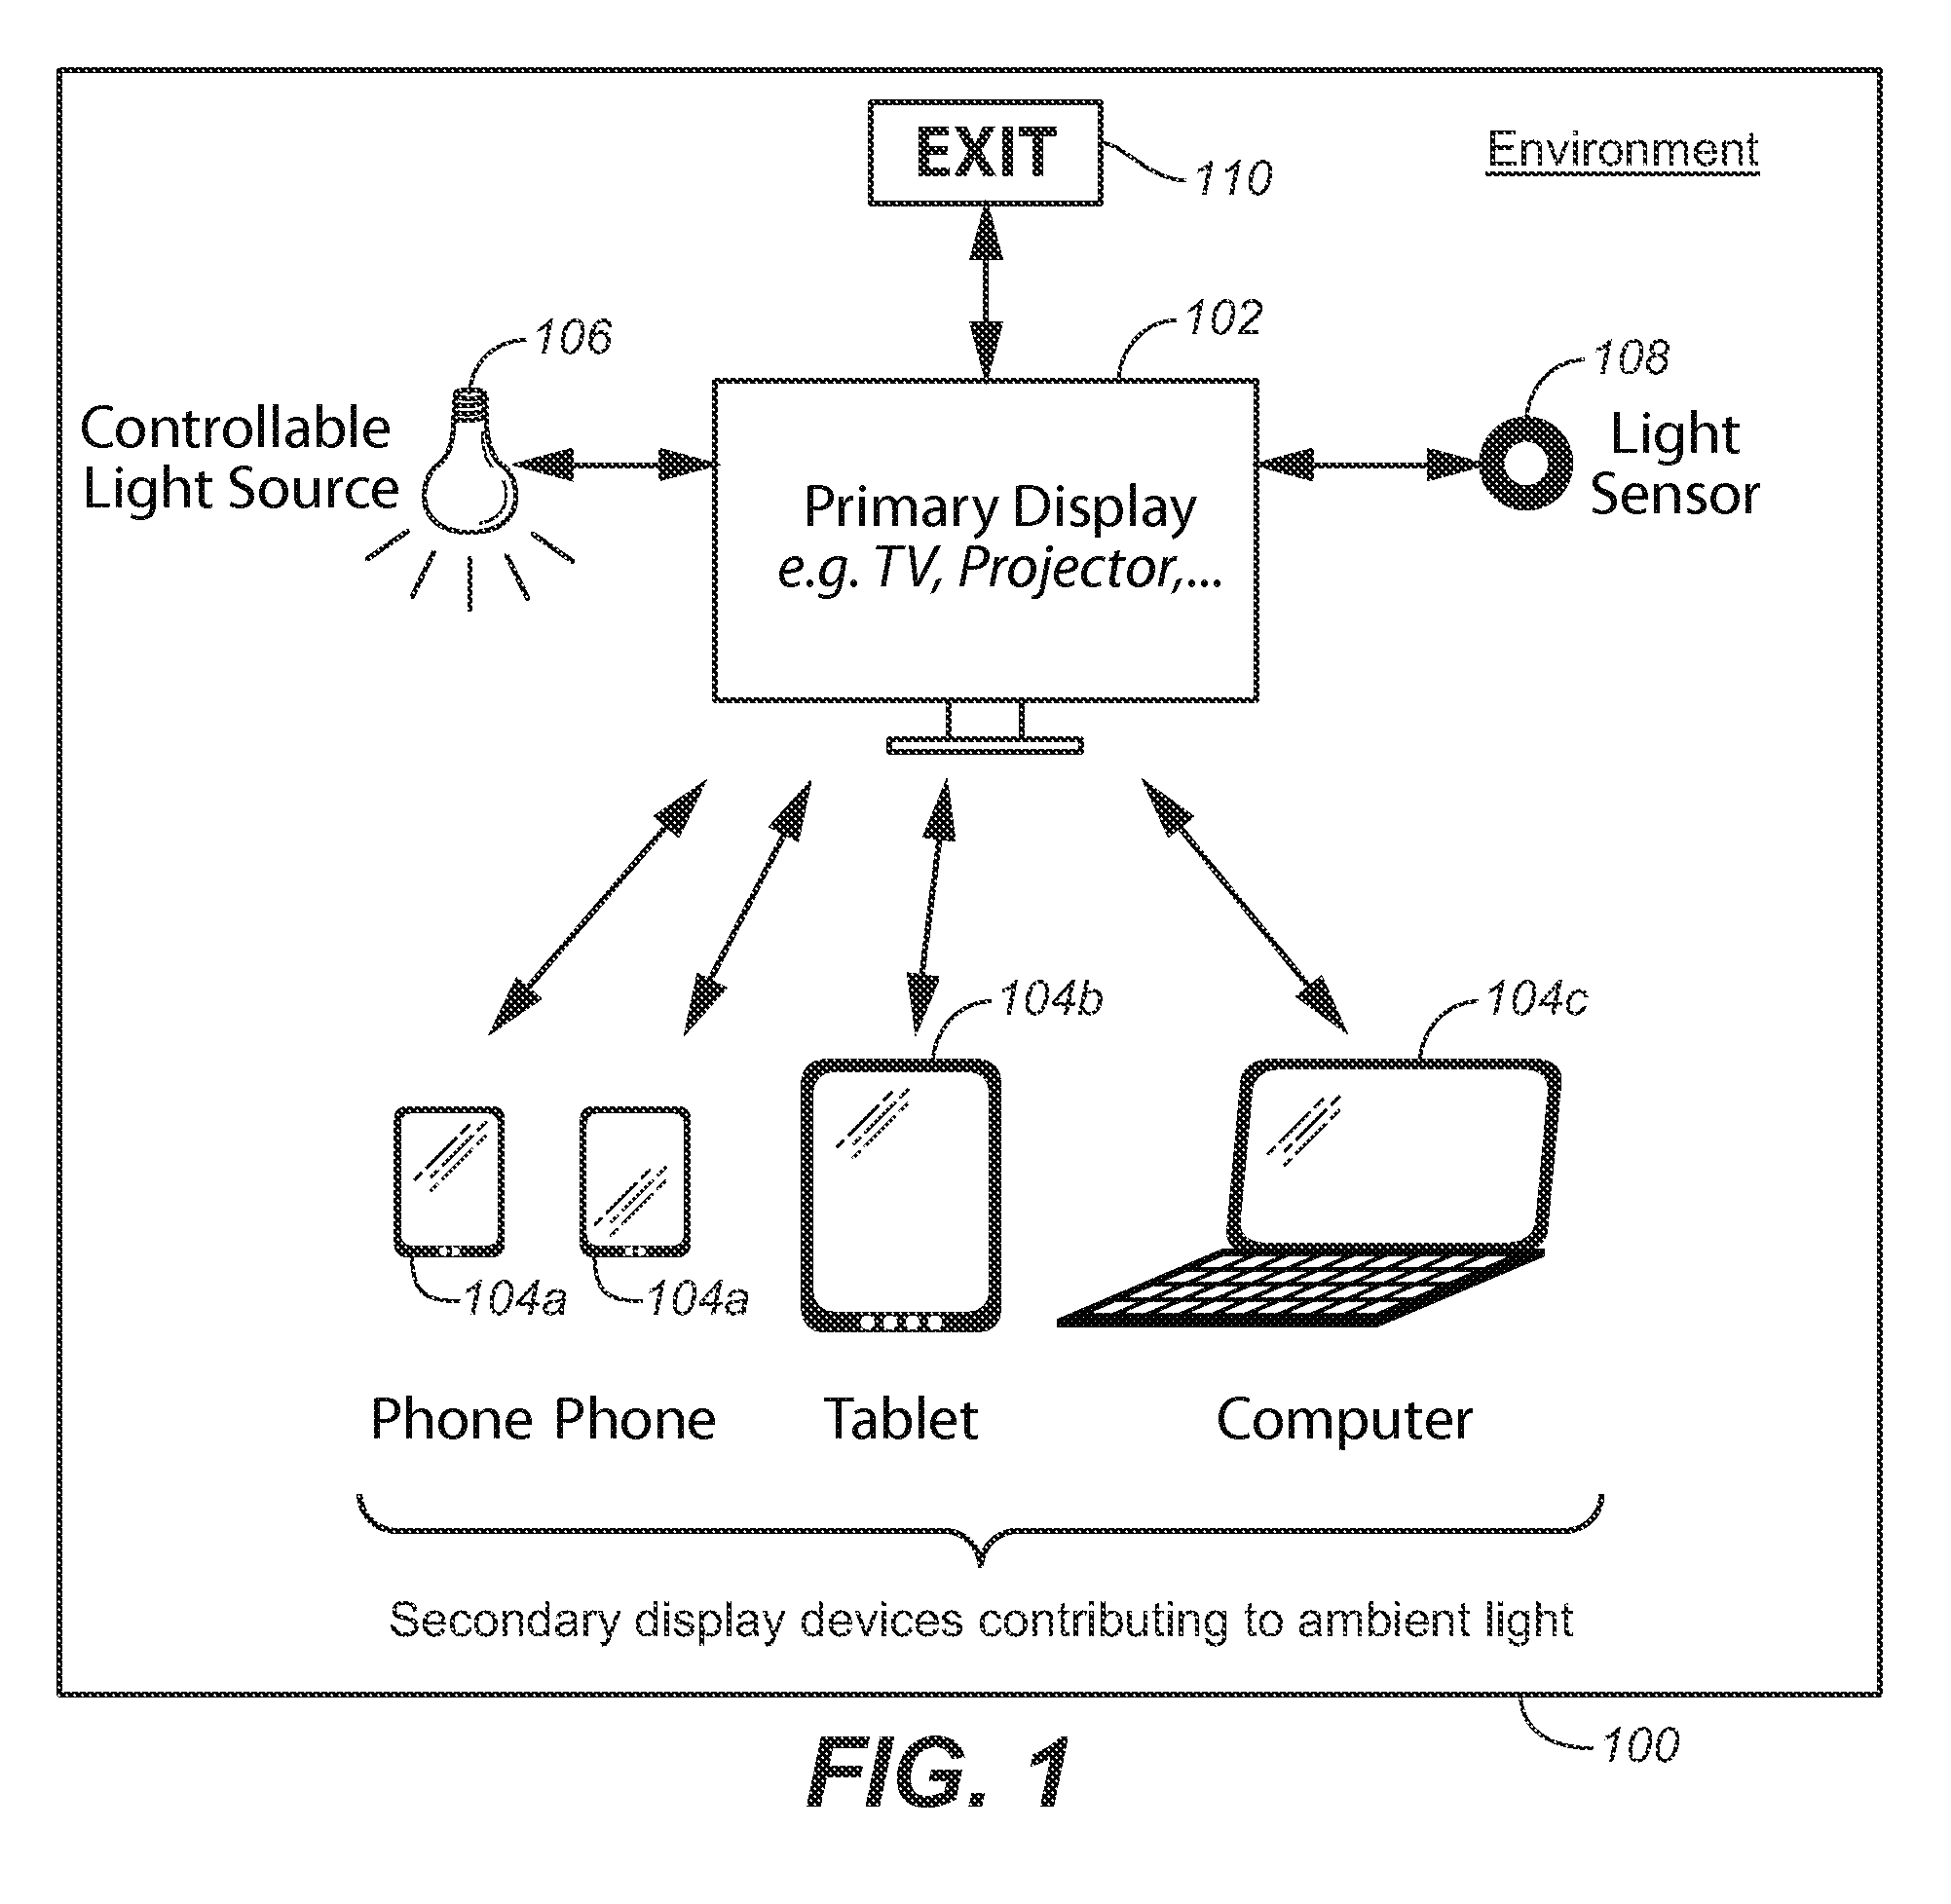 Systems and Methods for Synchronizing Secondary Display Devices to a Primary Display